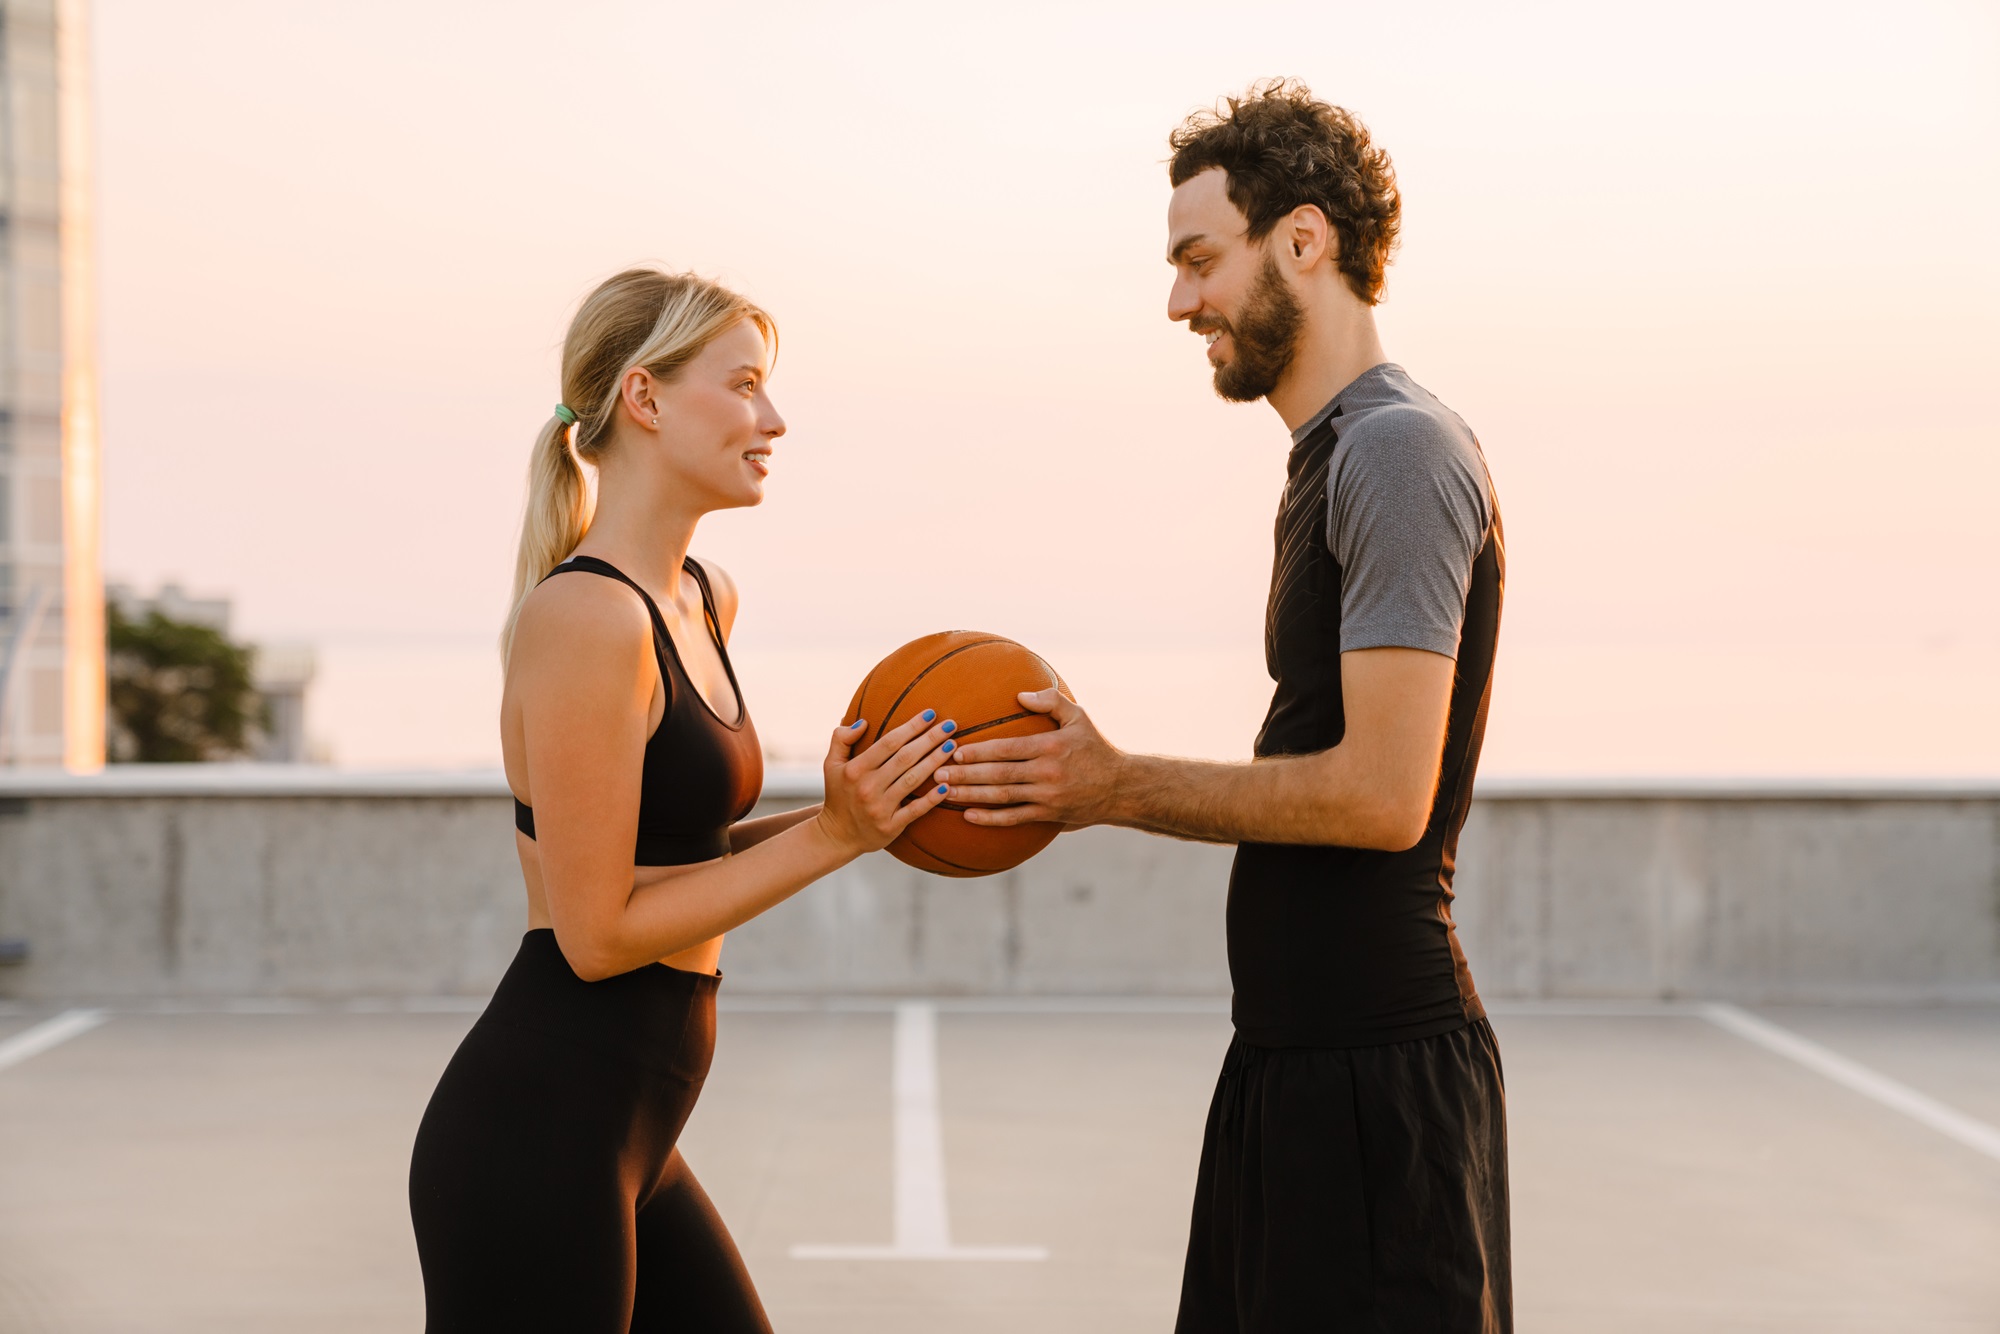 Young man and woman playing with ball together